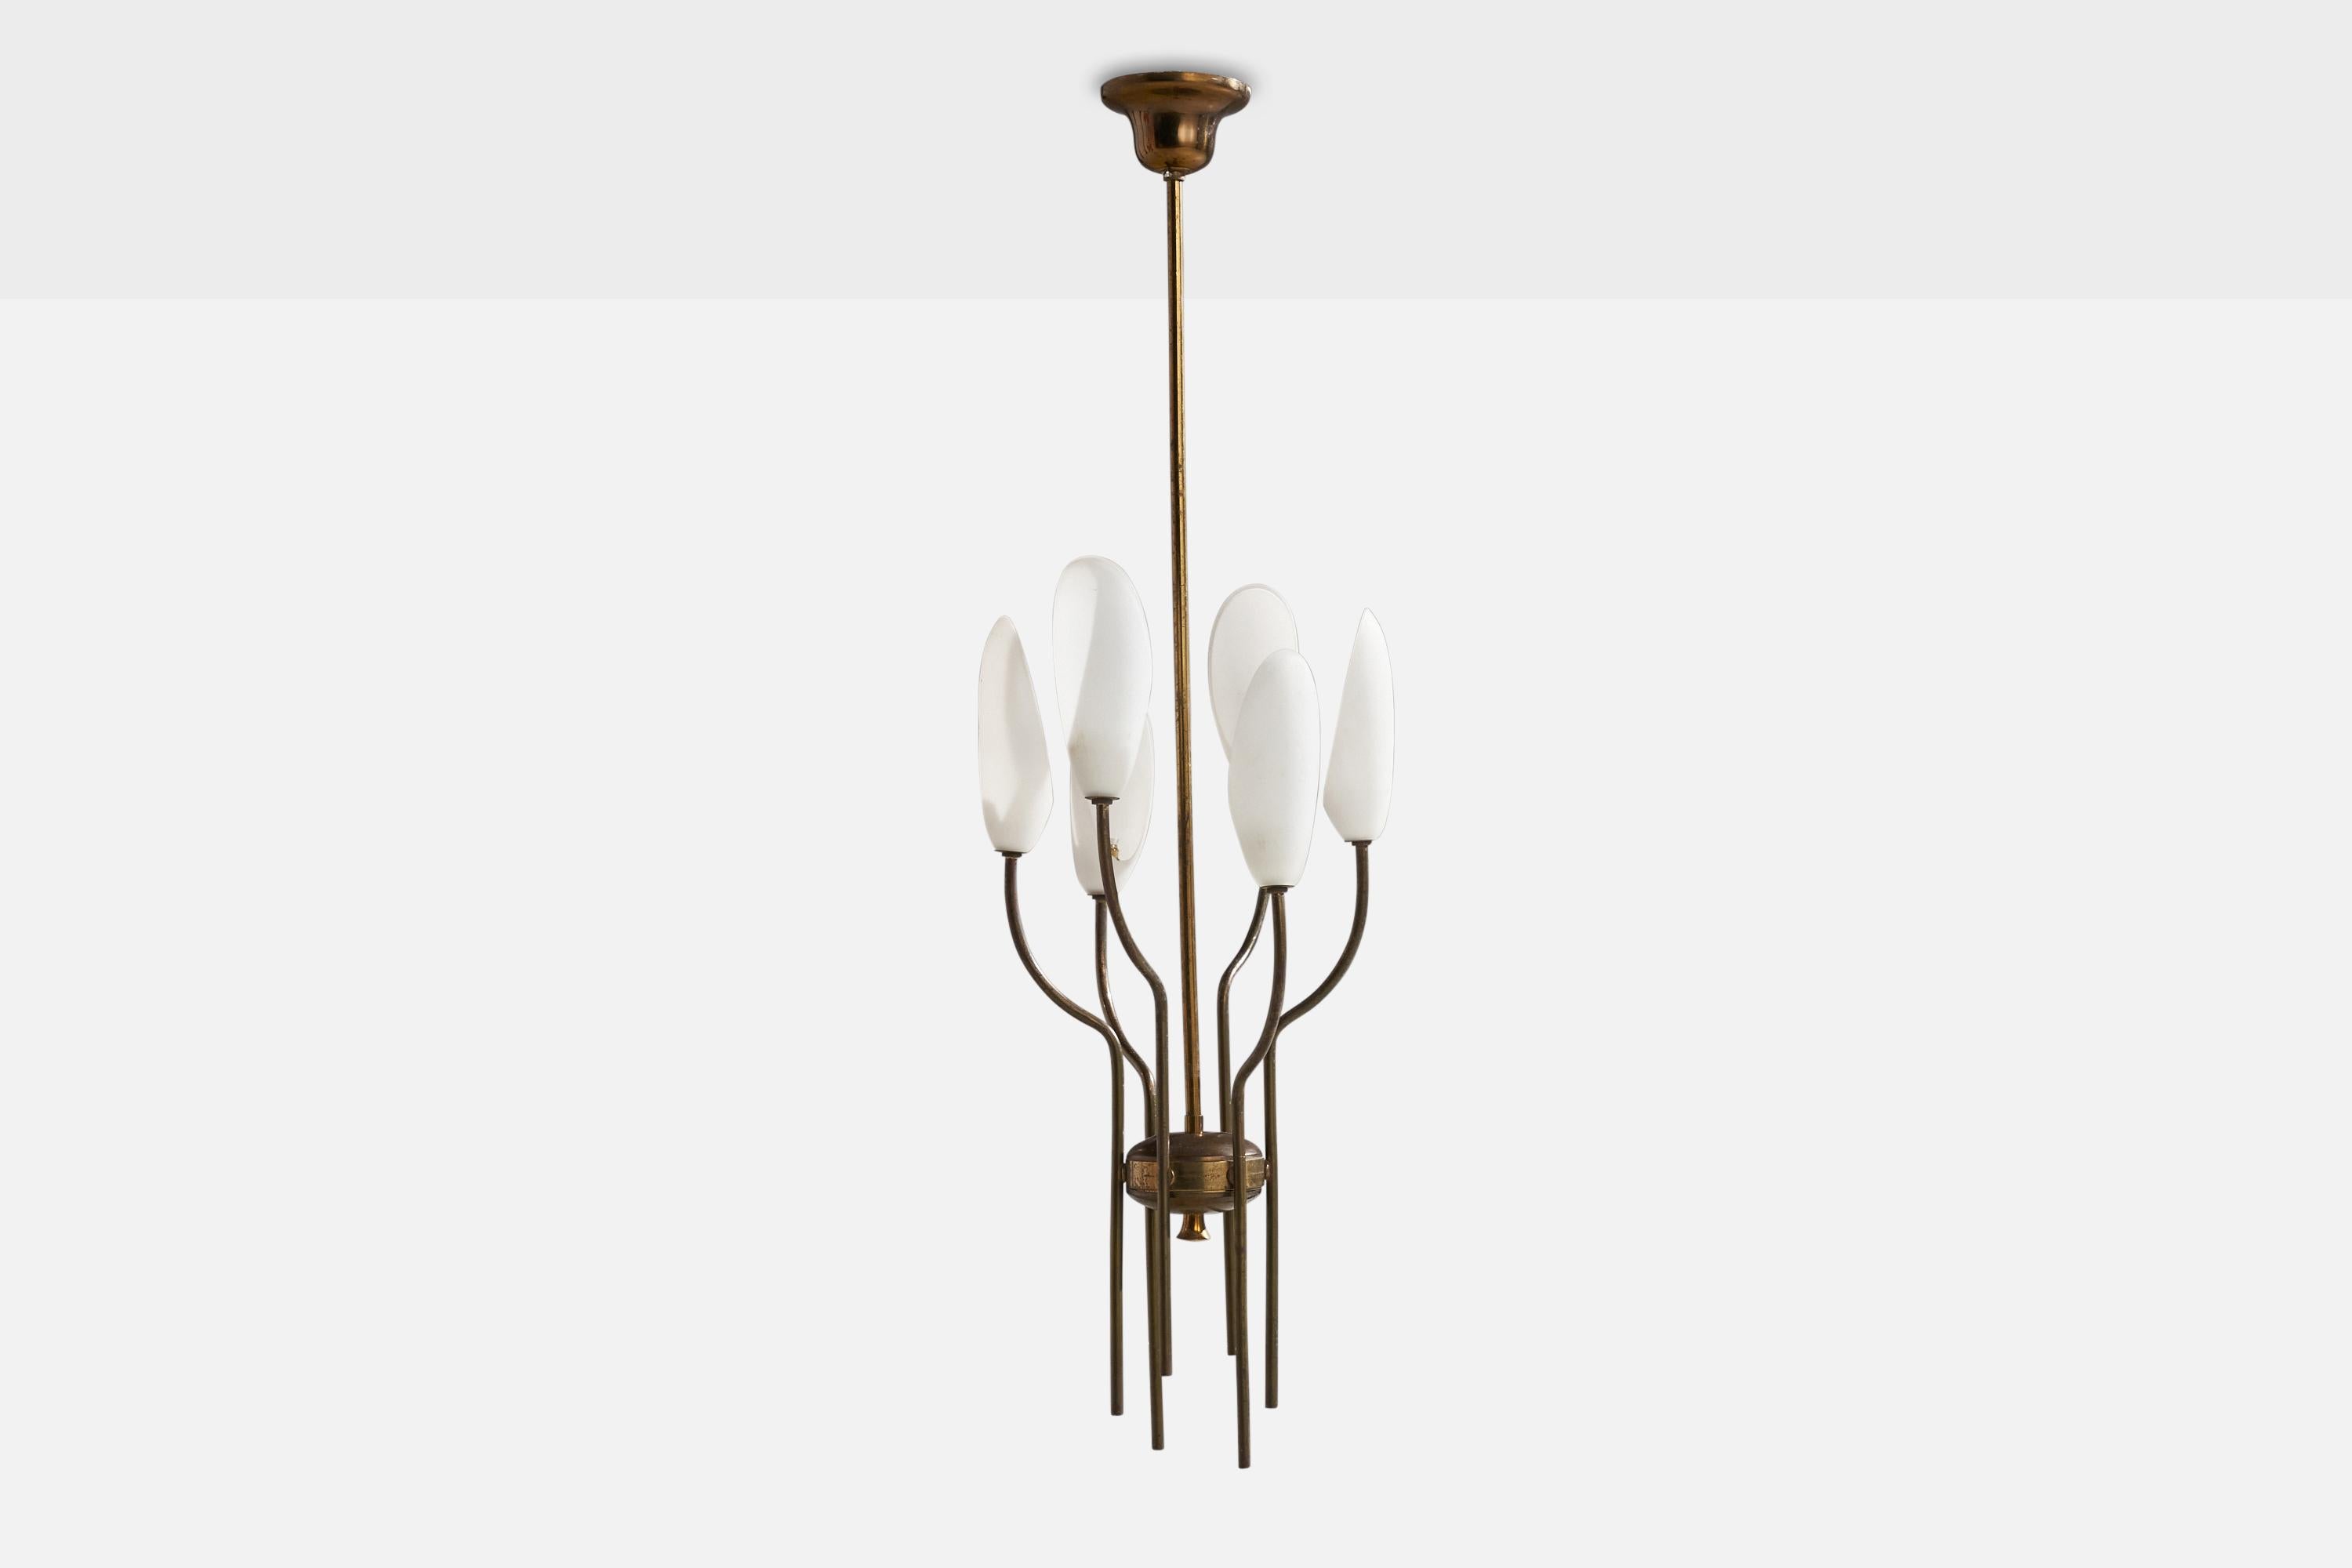 A brass and opaline glass chandelier designed and produced in Italy, 1940s.

Dimensions of canopy (inches): 2.5” H x 3.75”  Diameter
Socket takes standard E-14 bulbs. 6 sockets.There is no maximum wattage stated on the fixture. All lighting will be